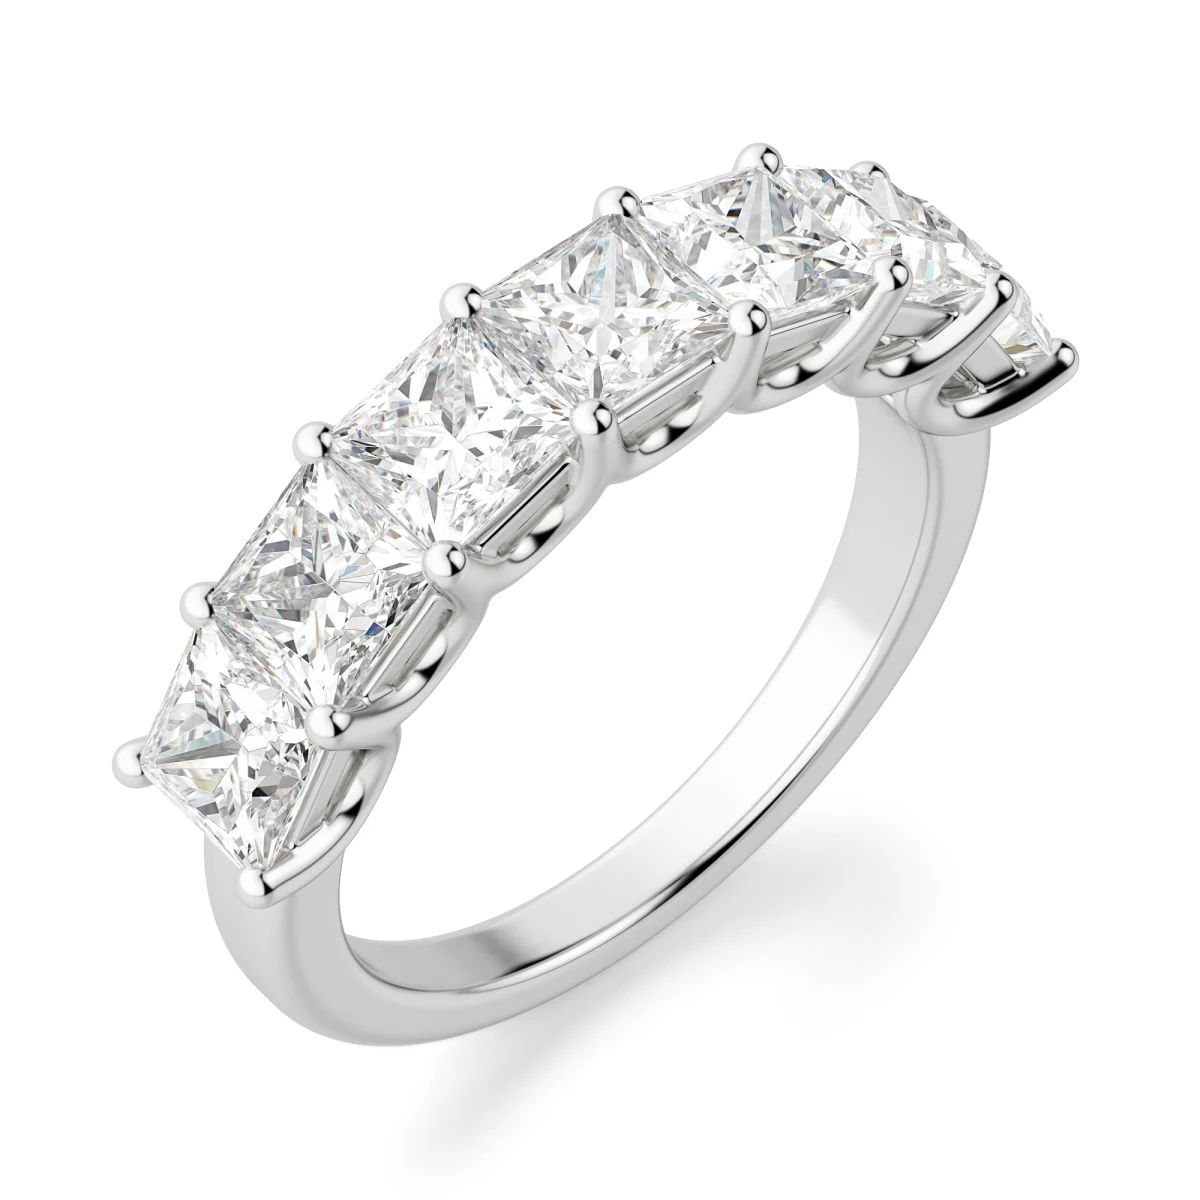 Princess Cut Wedding Anniversary Band for Her